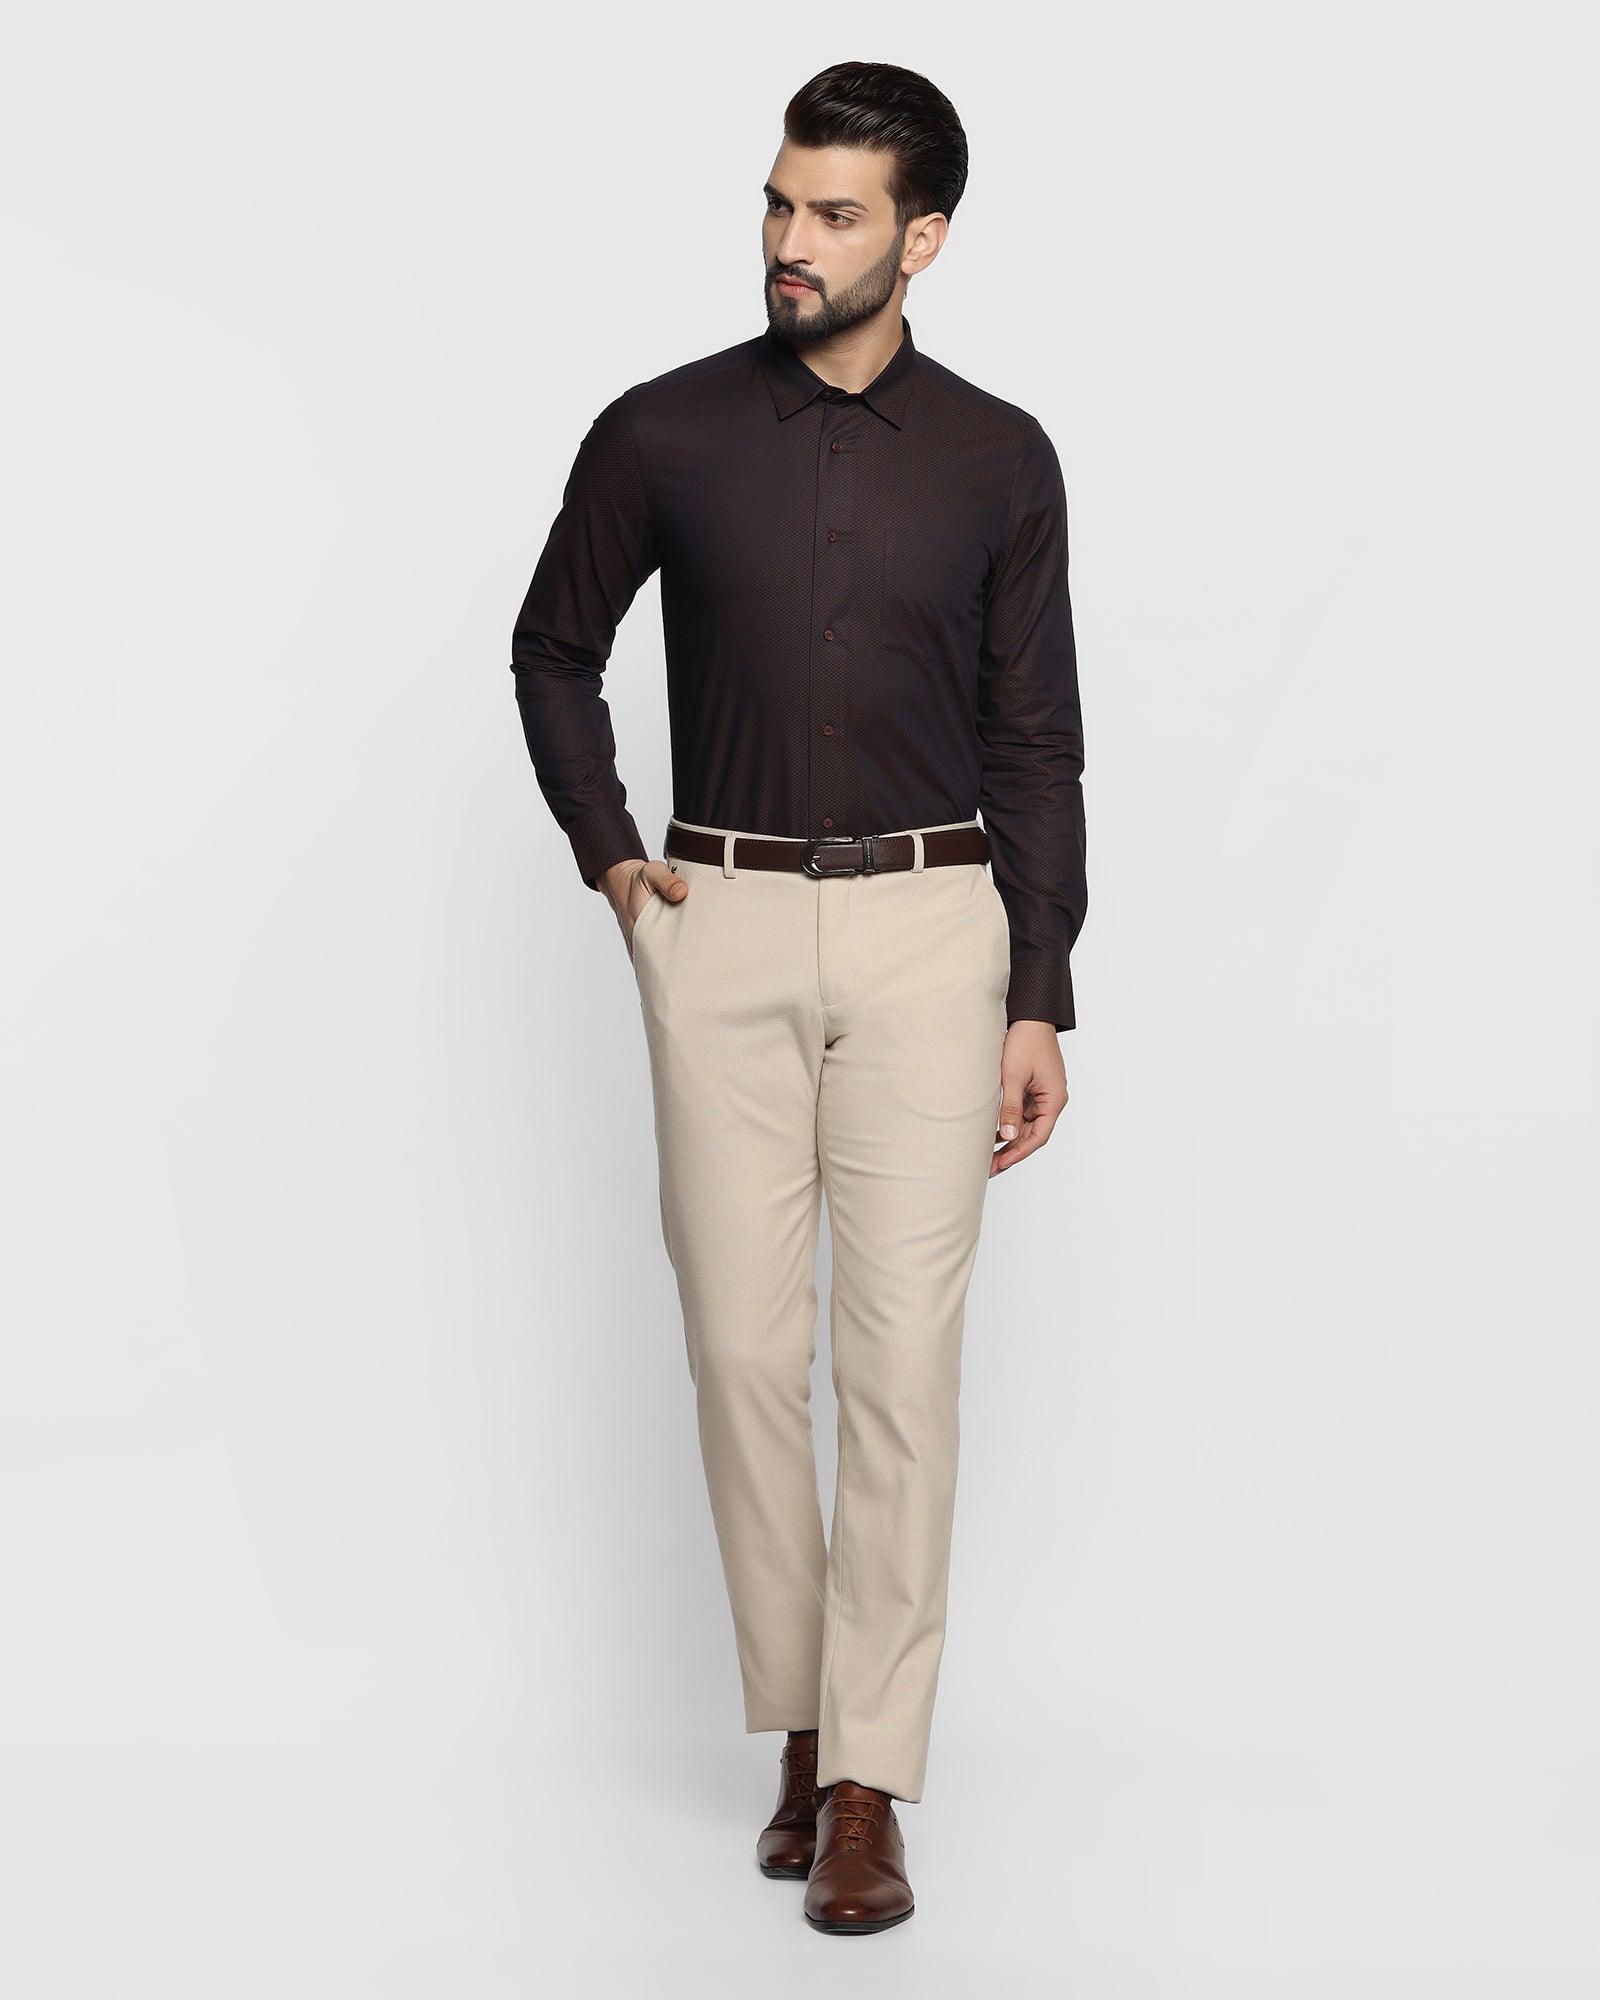 Luxe Formal Wine Solid Shirt - Bruno